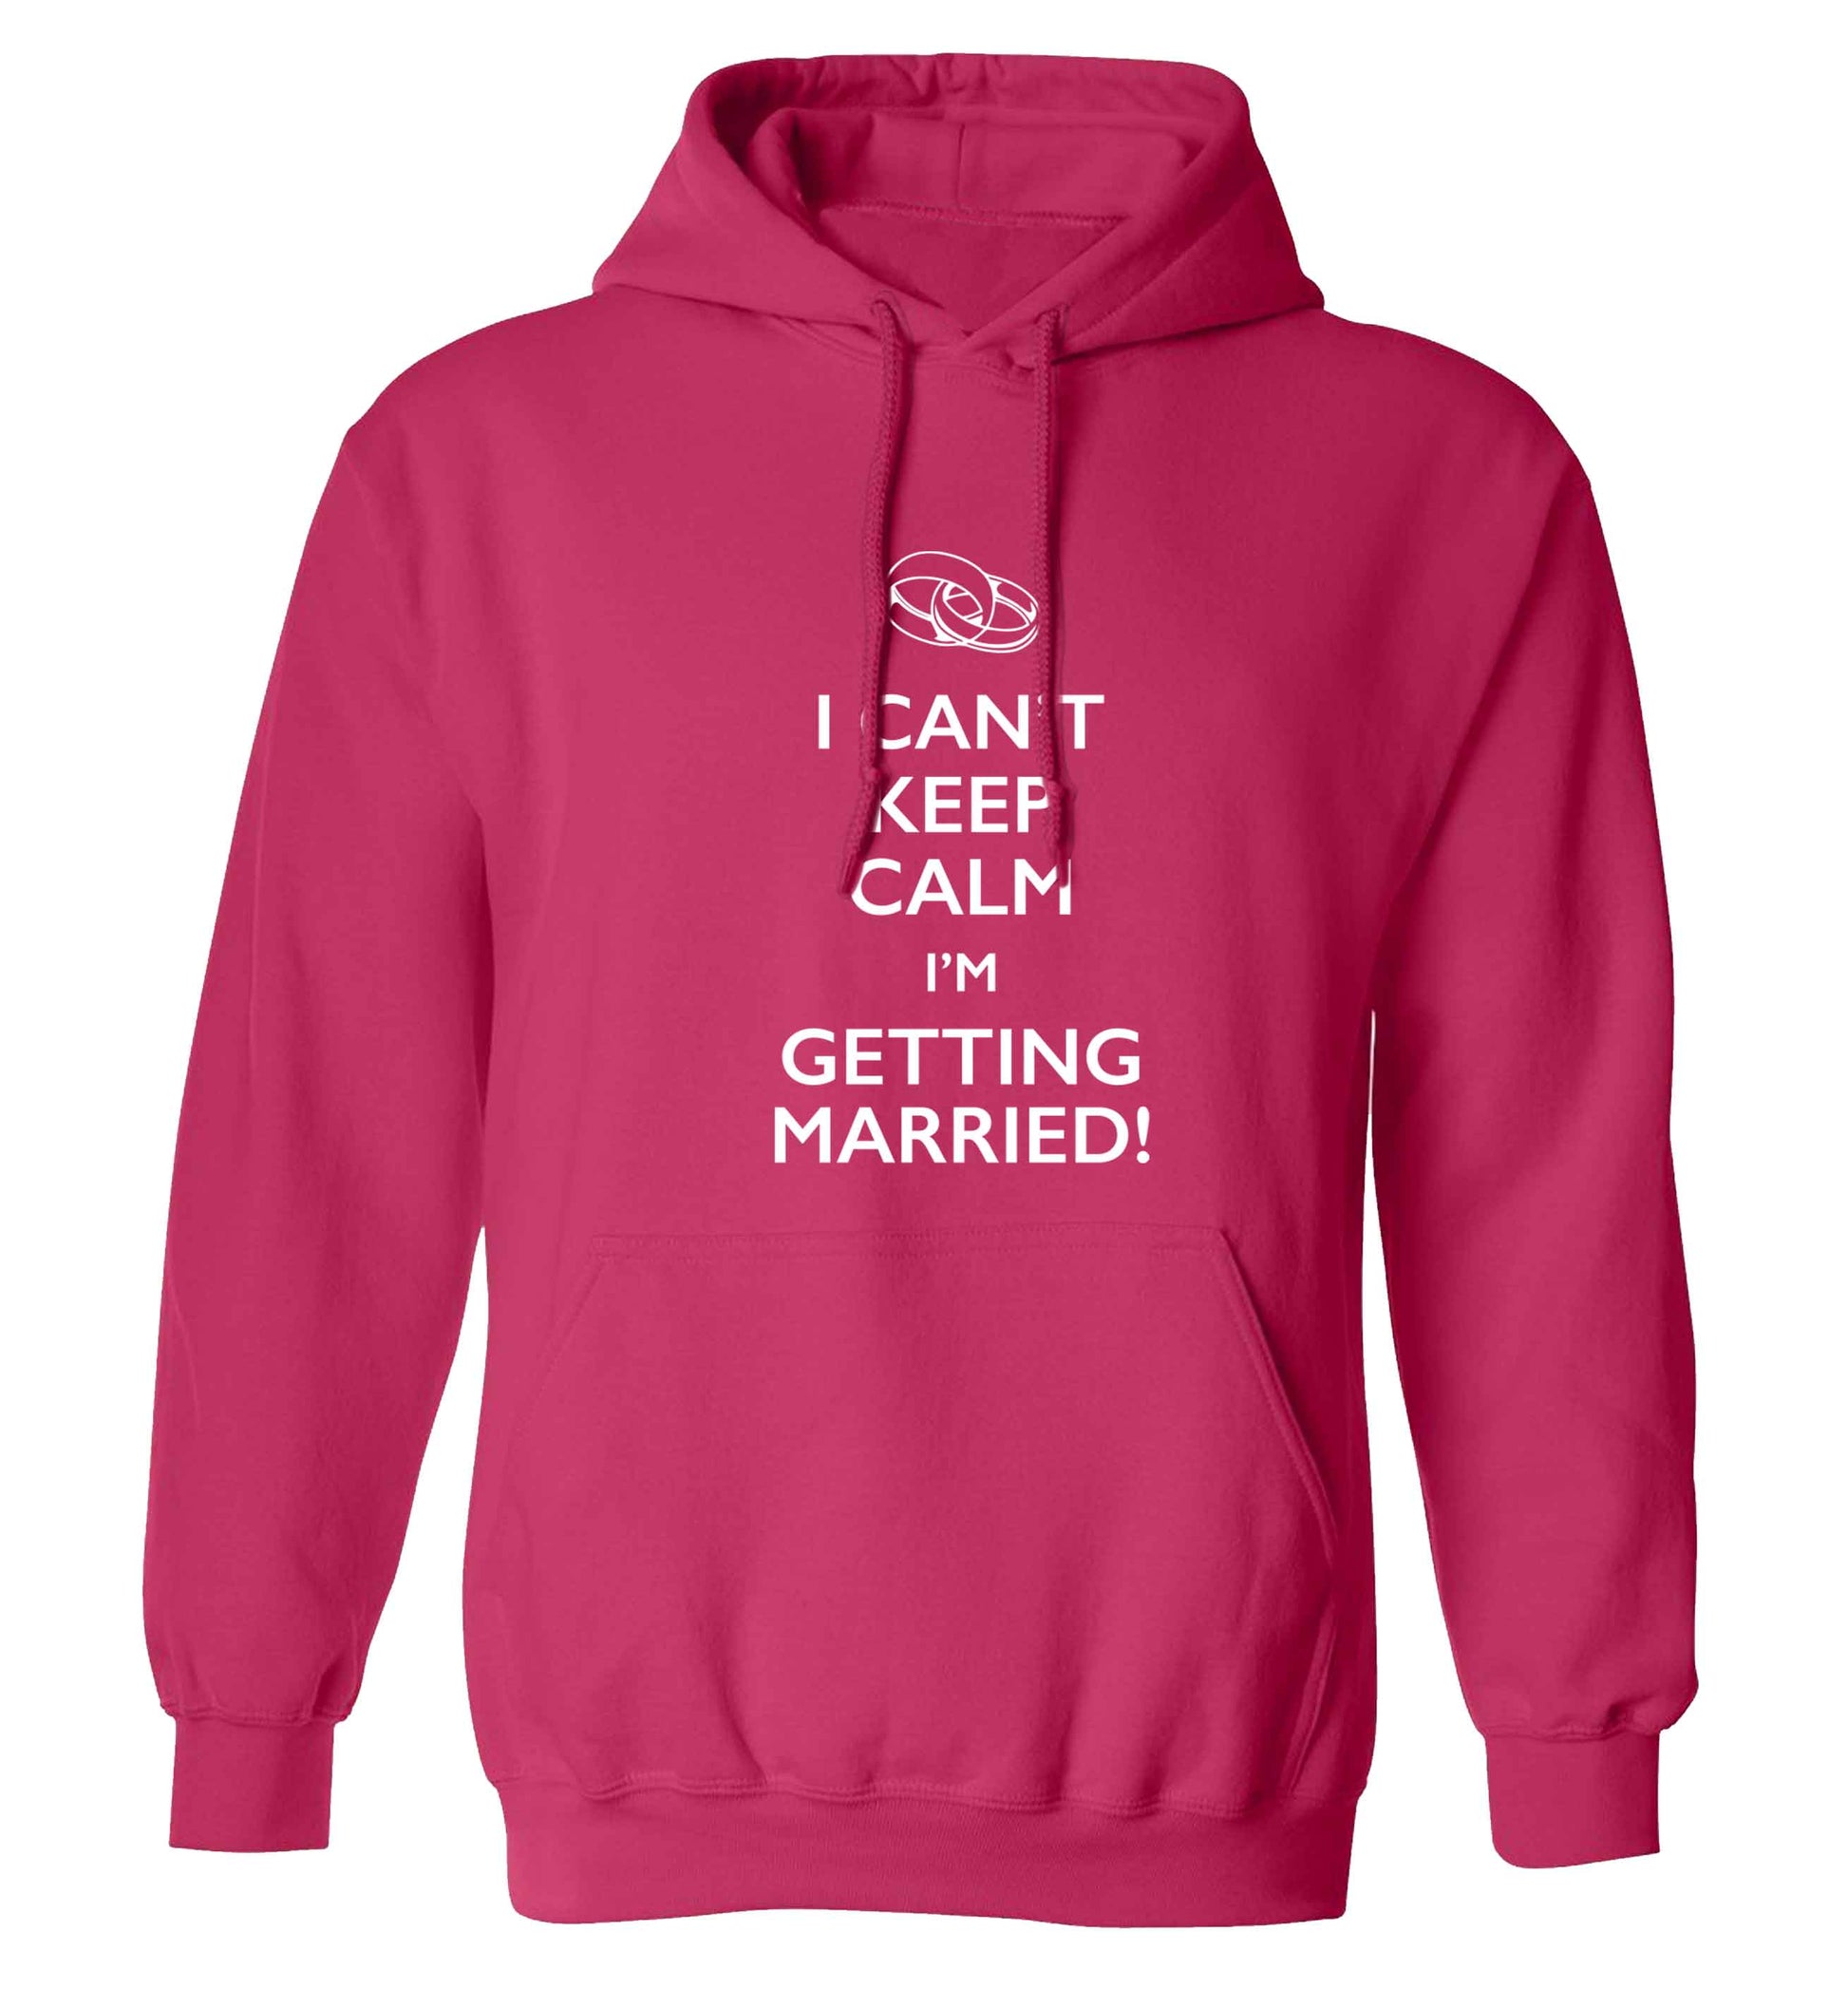 I can't keep calm I'm getting married! adults unisex pink hoodie 2XL